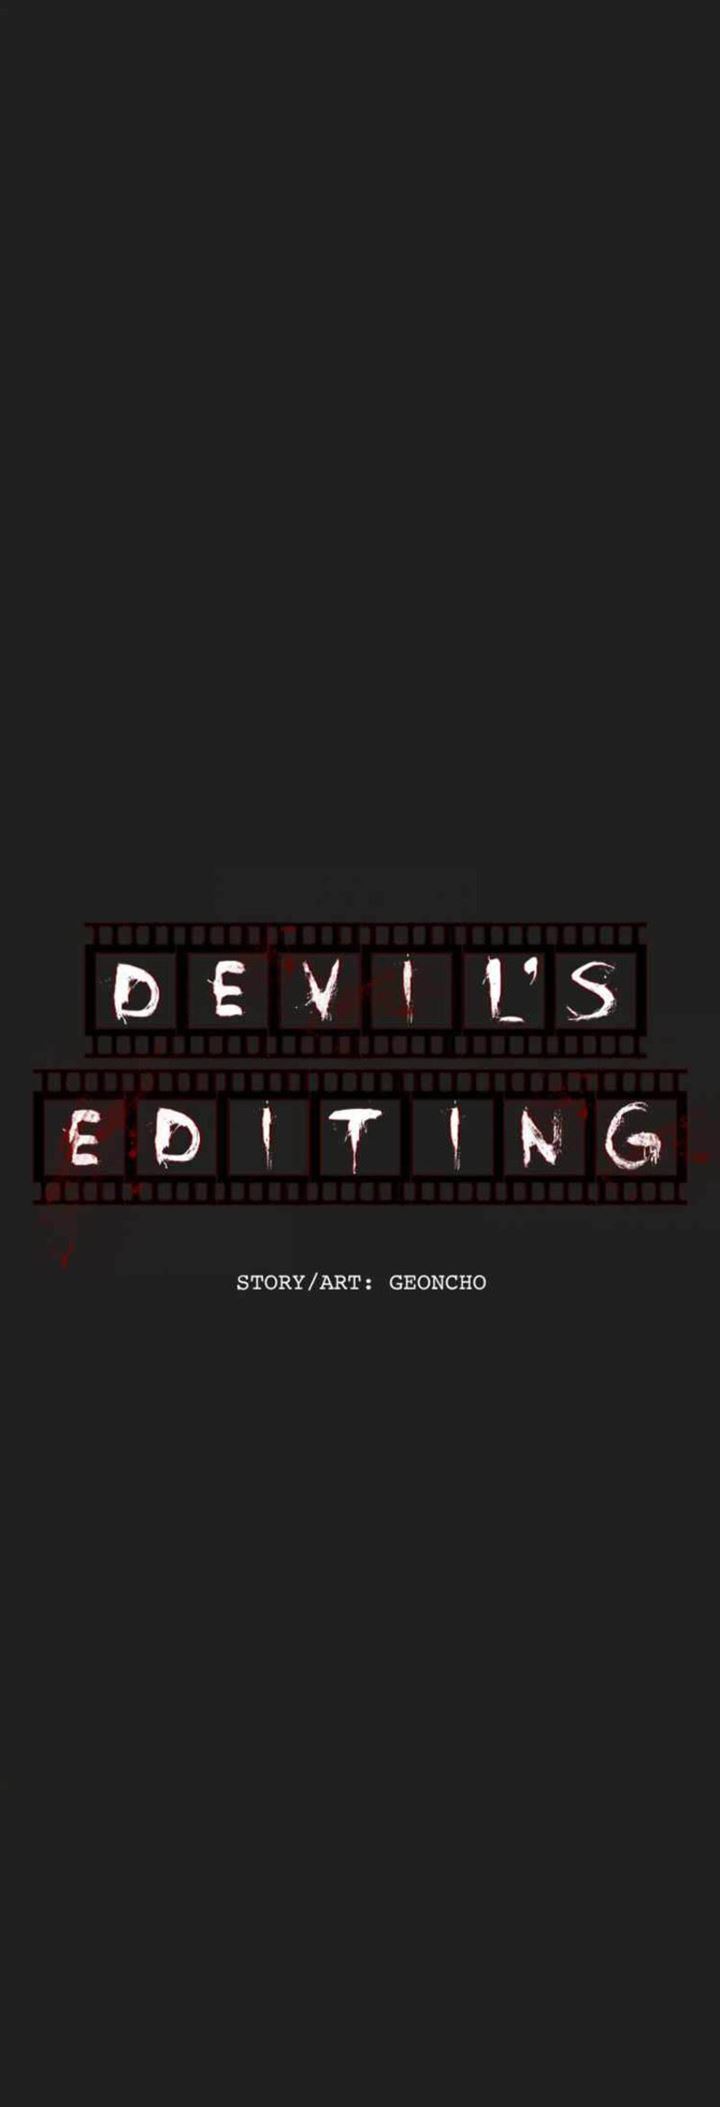 Devil’s Editing Chapter 33